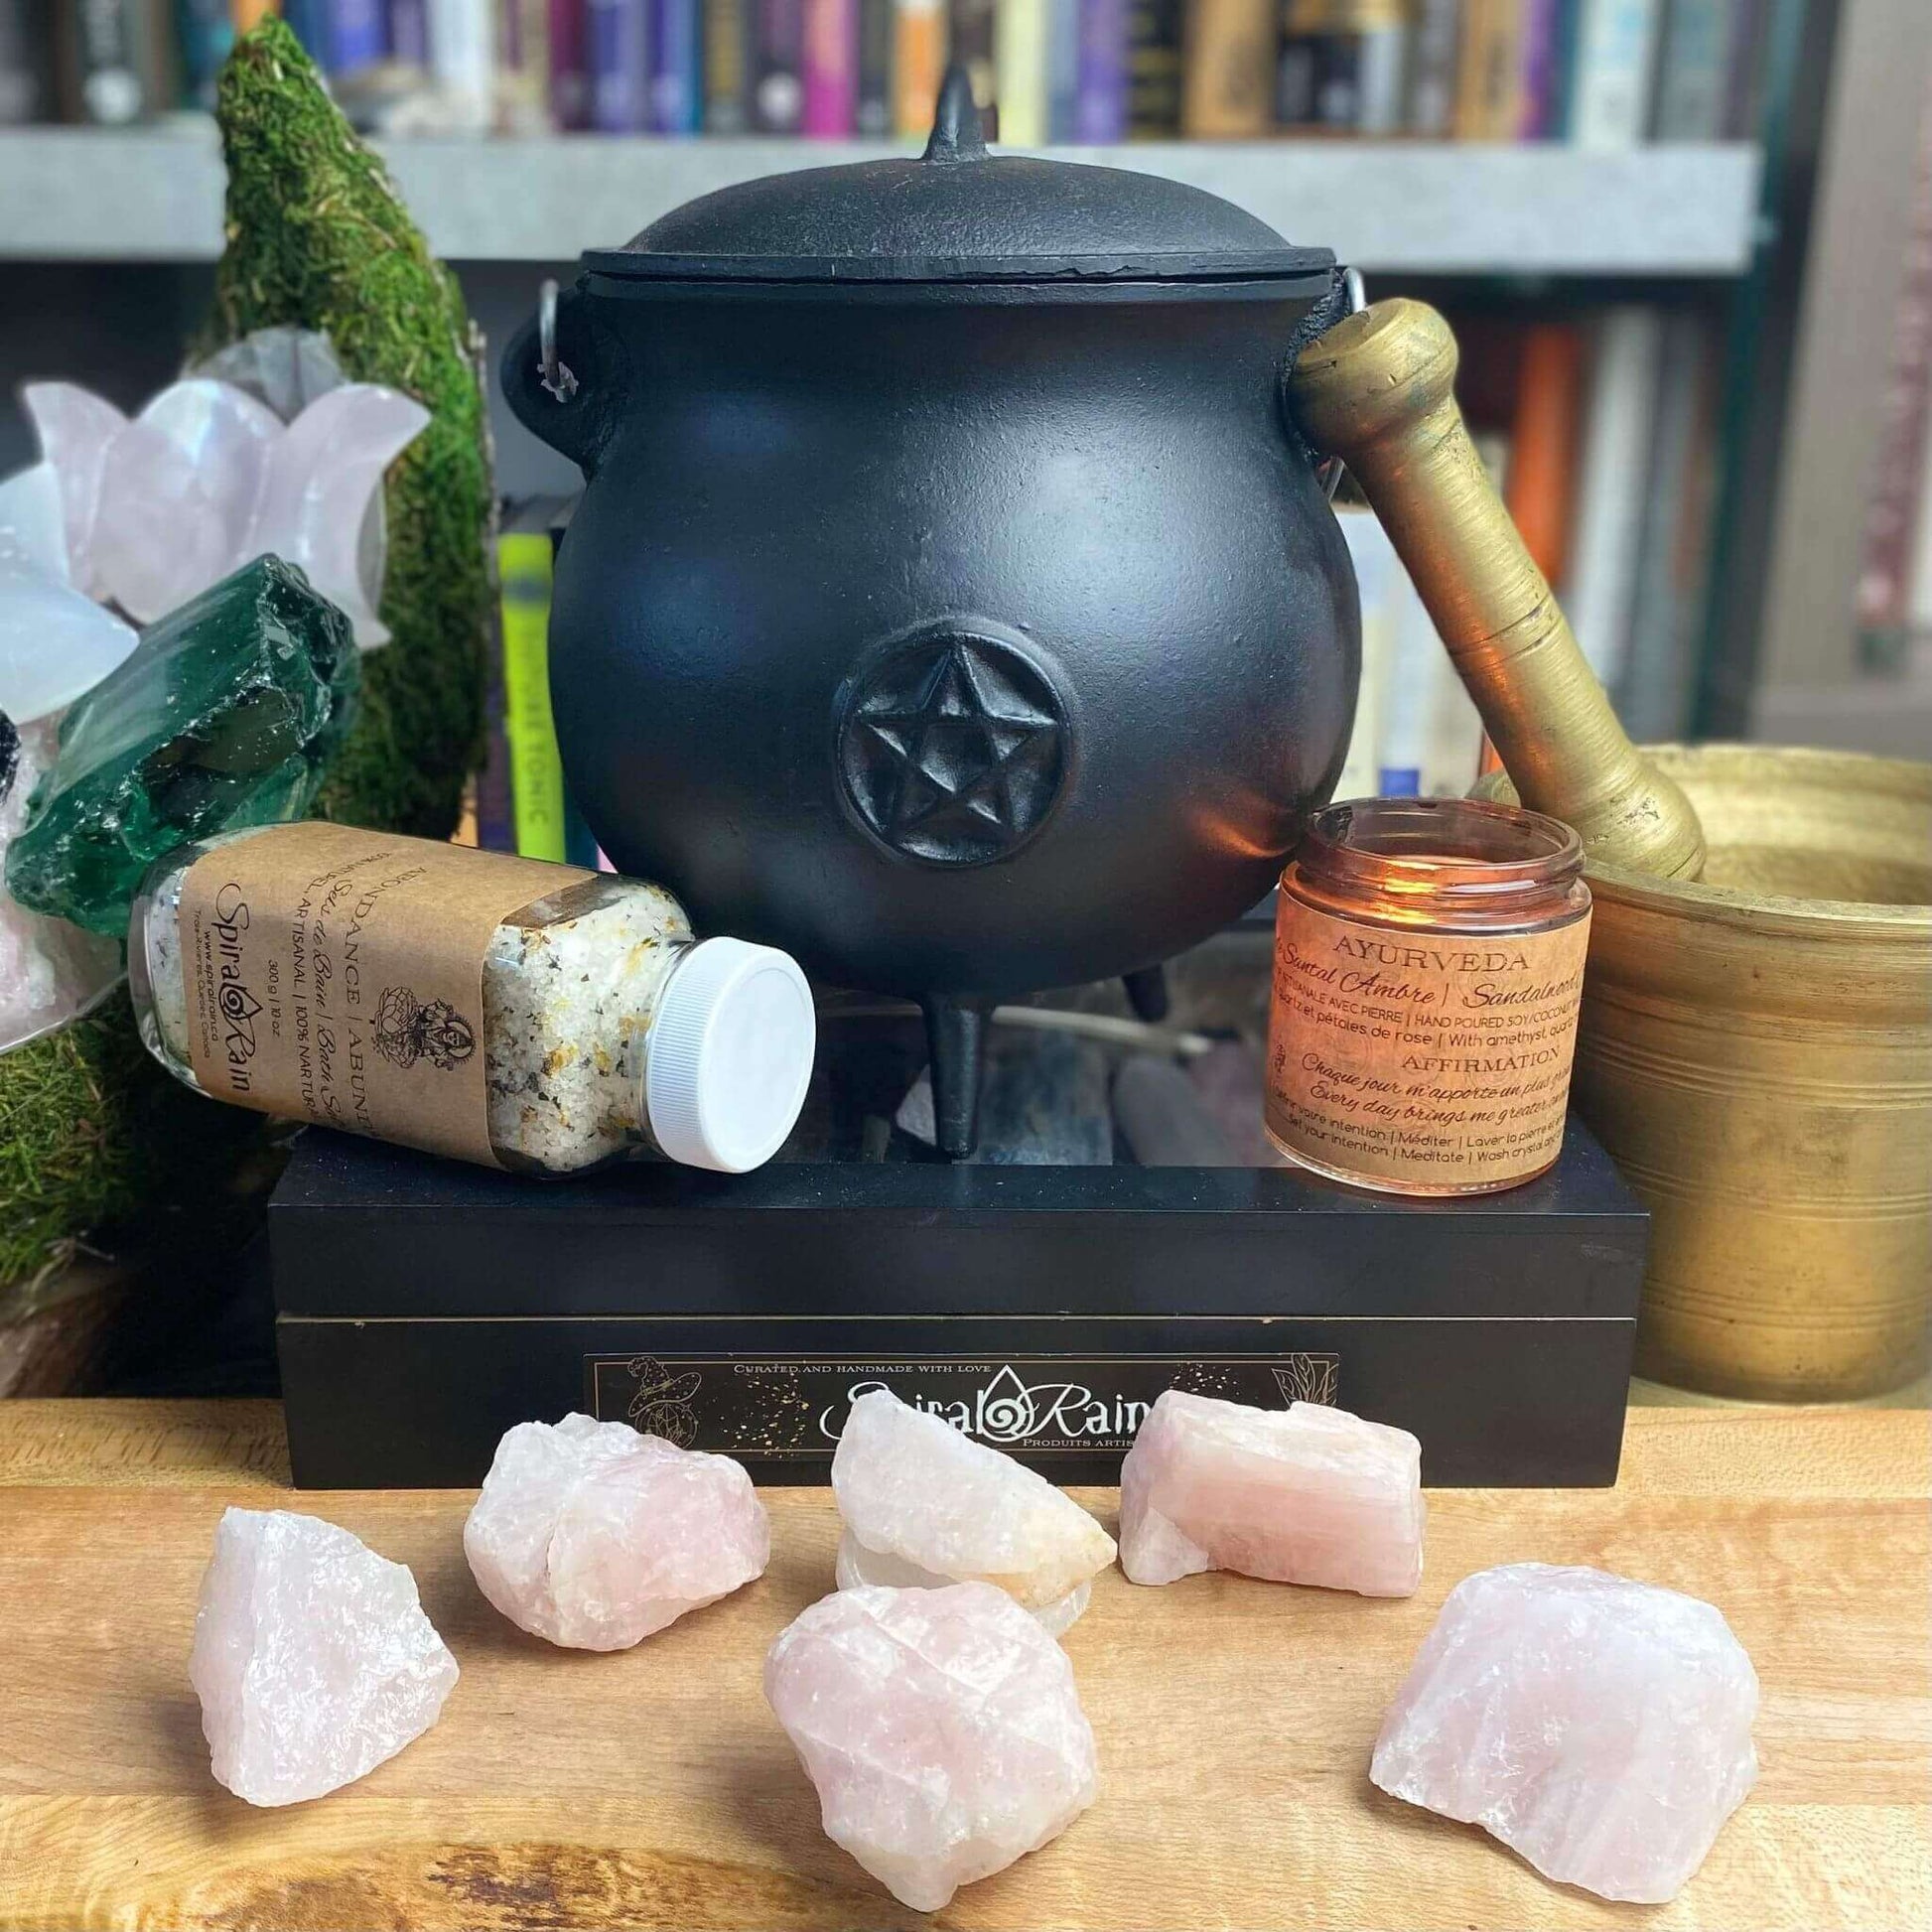 Rose Quartz raw at $3 only from Spiral Rain